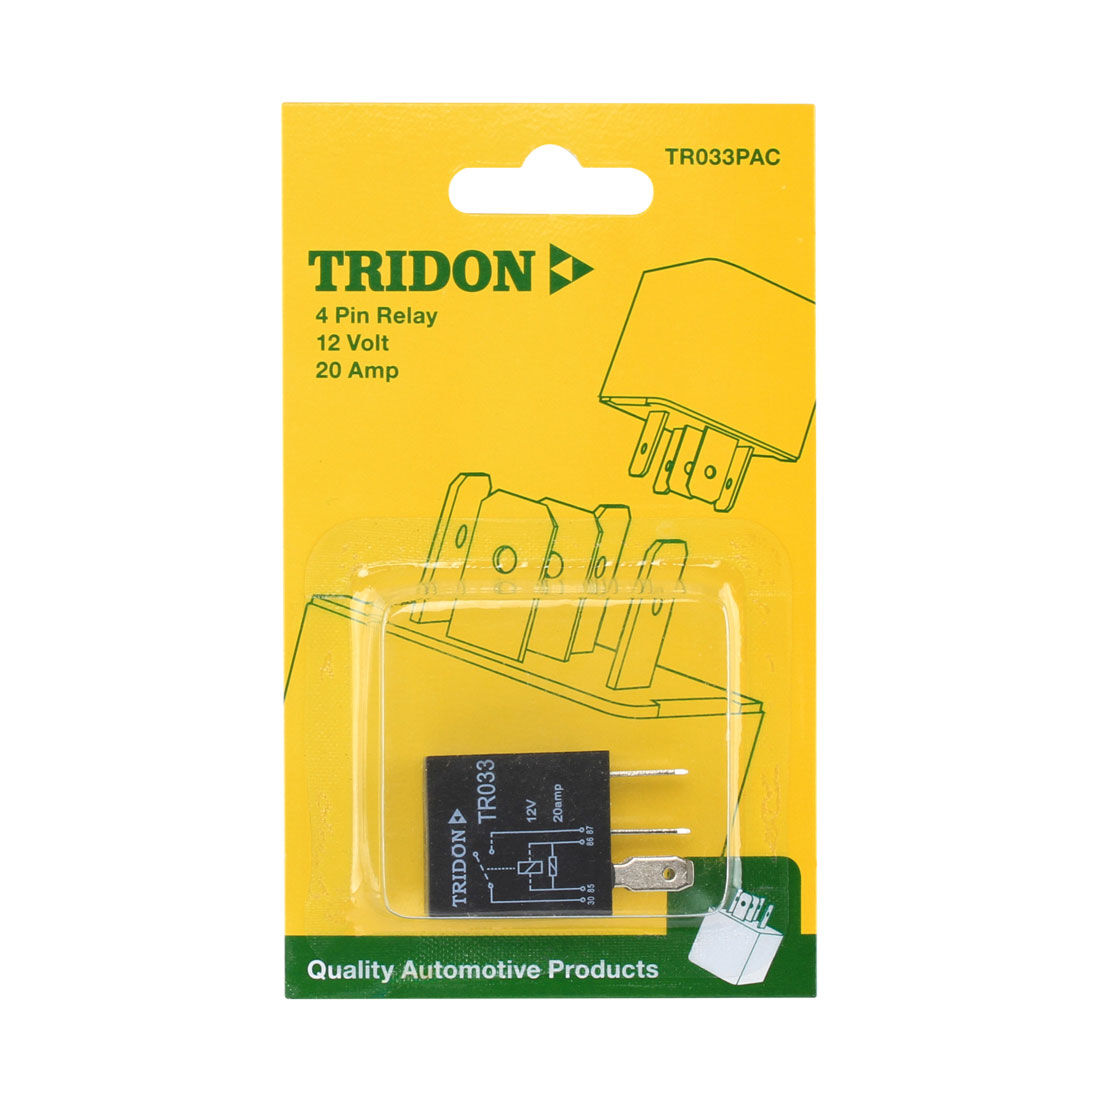 Tridon Relay - Micro, 12V 20 AMP 4 Pin, Non Outage - TR033PAC, , scaau_hi-res